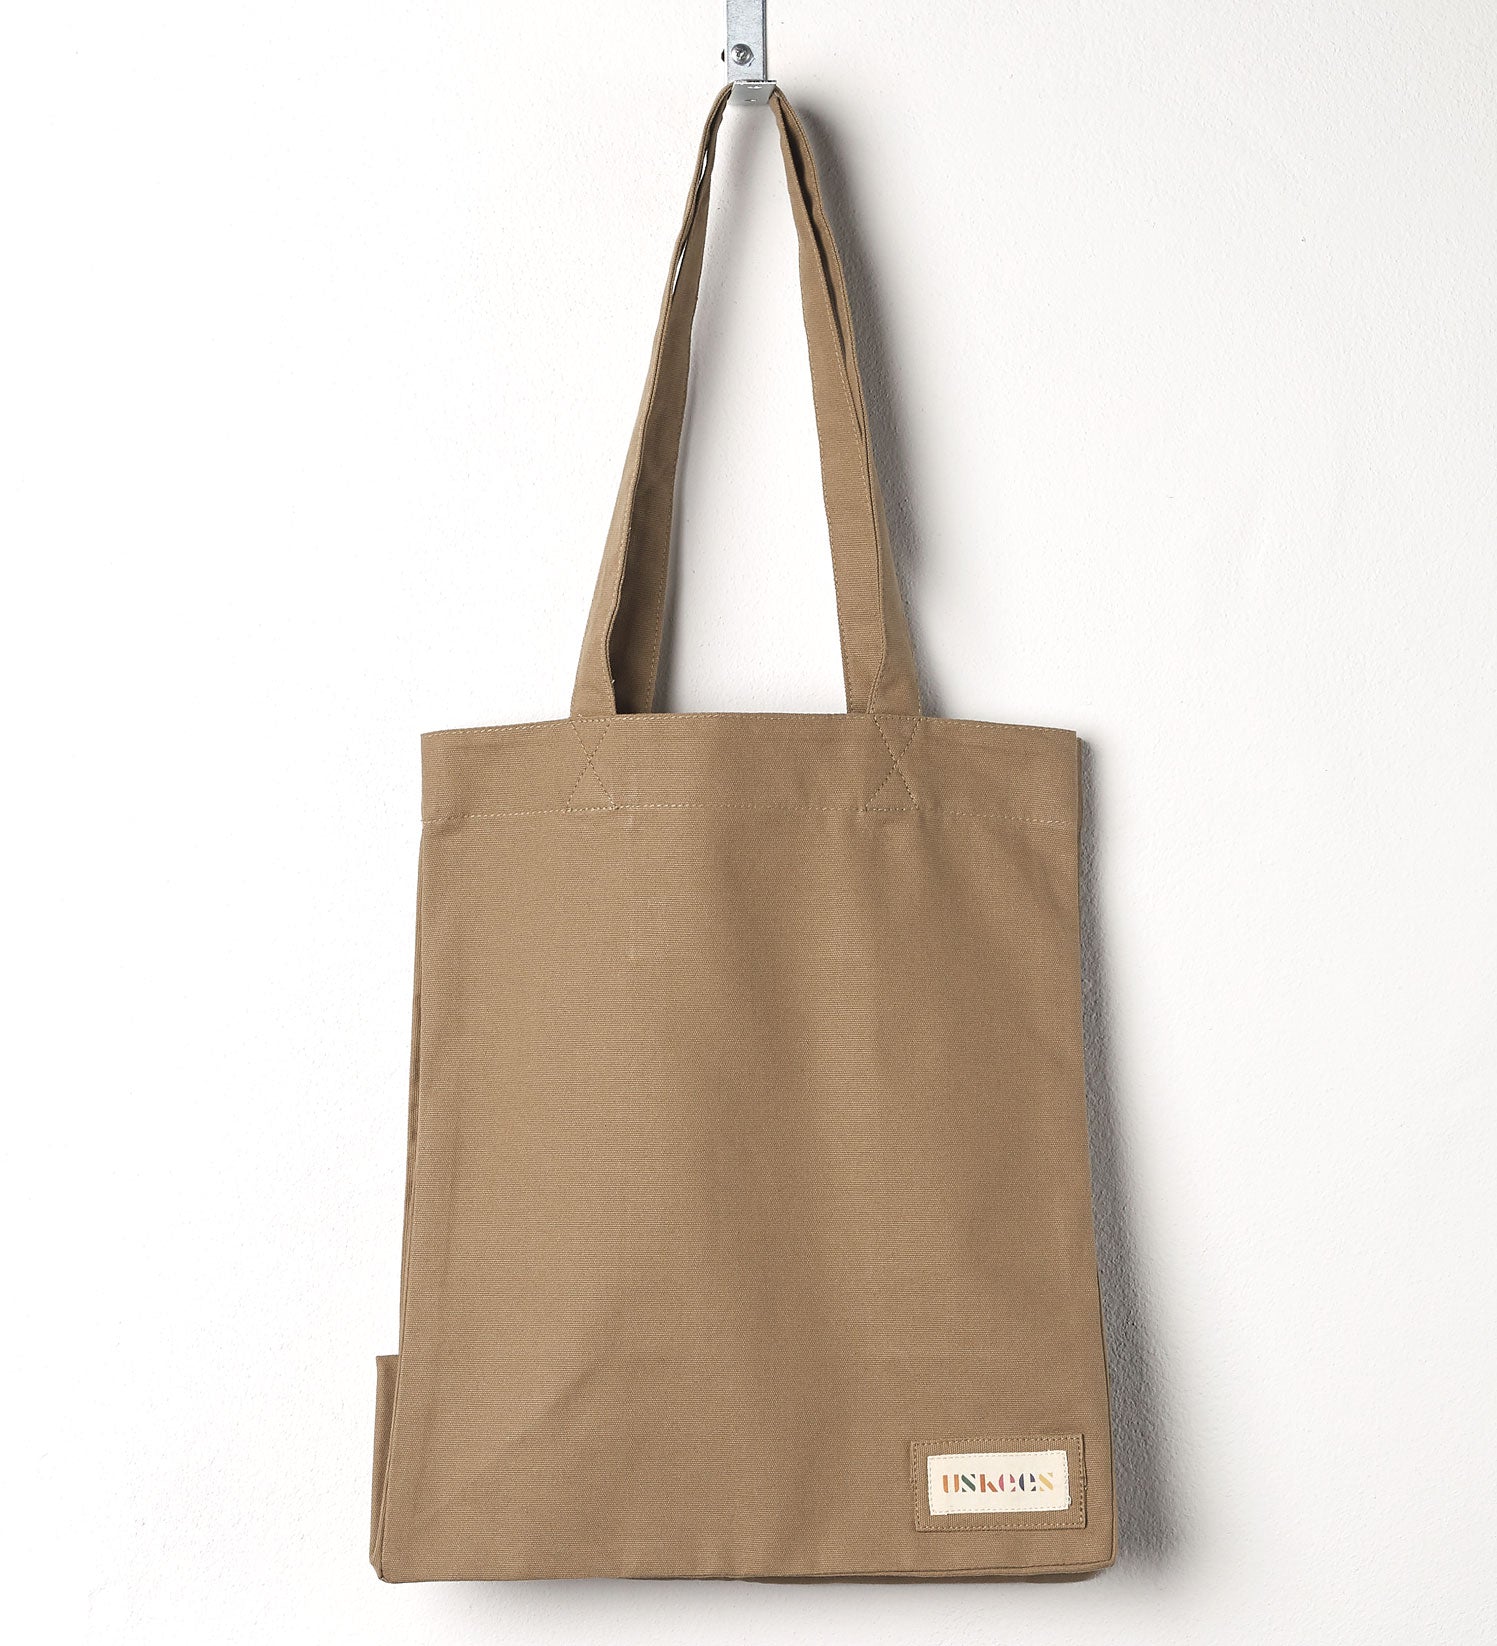 Full front hanging shot of Uskees #4002, small khaki tote bag, showing double handles.